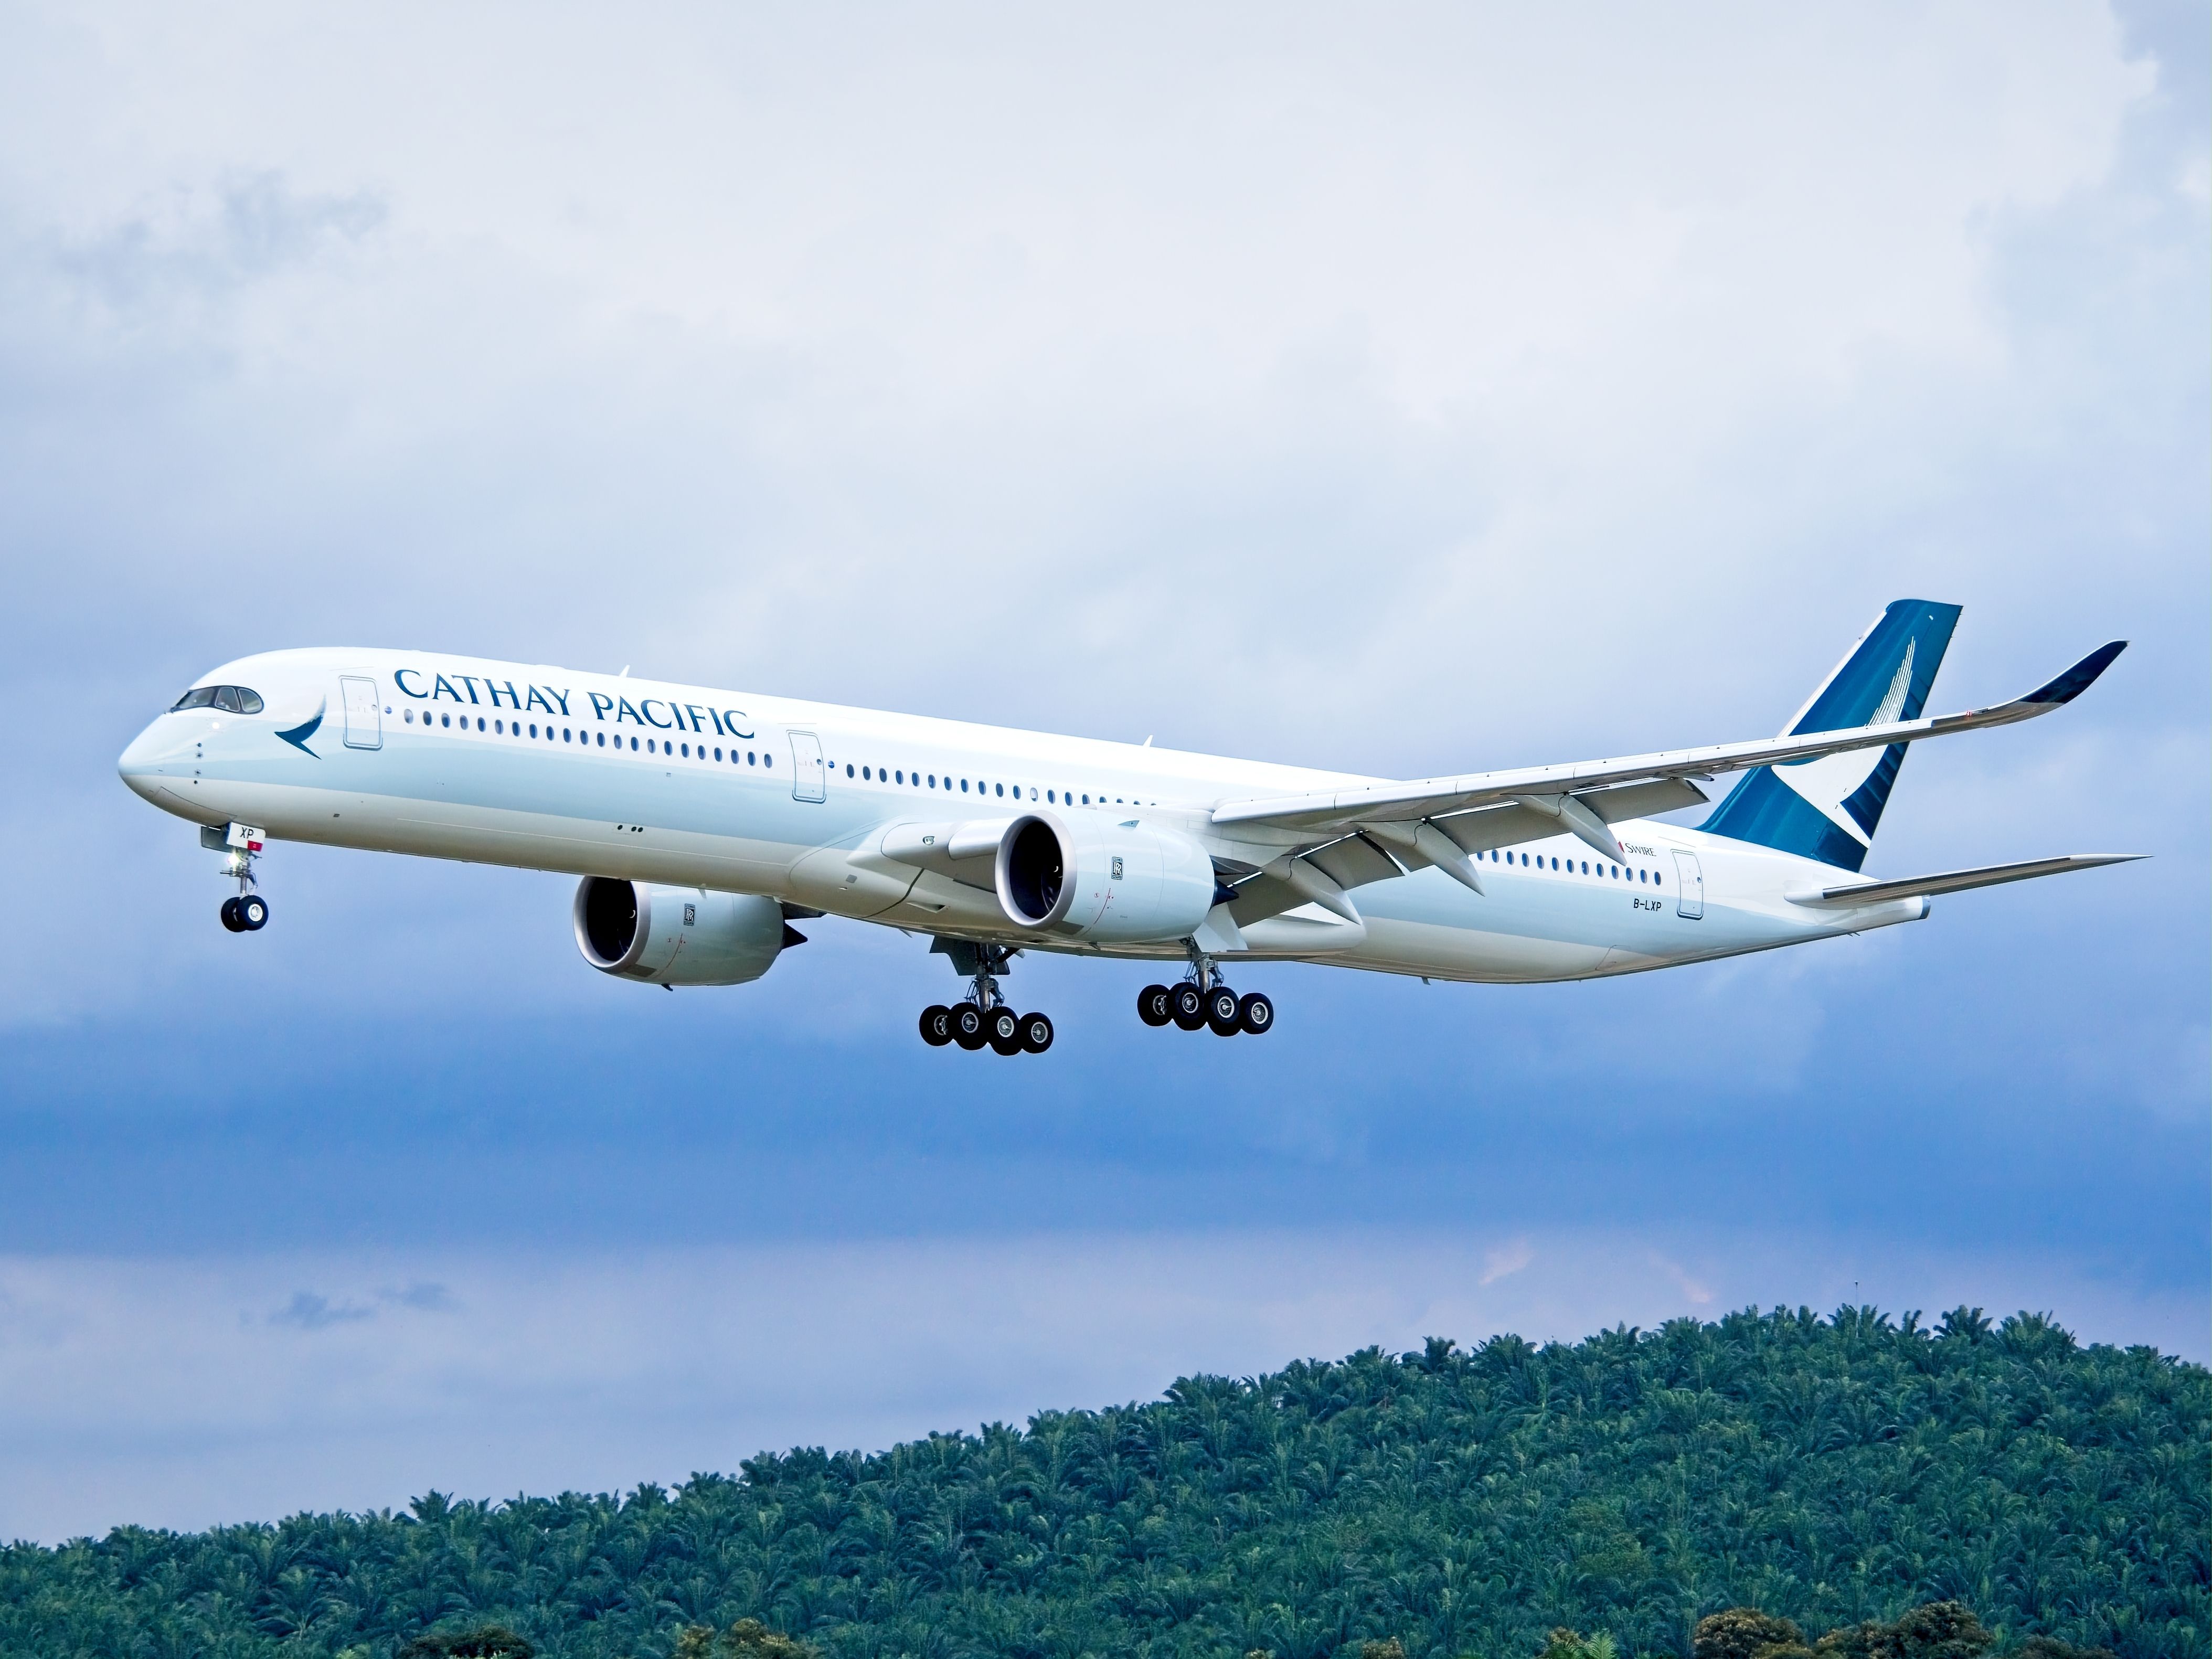 A Cathay pacific Airbus A350-1000 about to land In Kuala Lumpur.